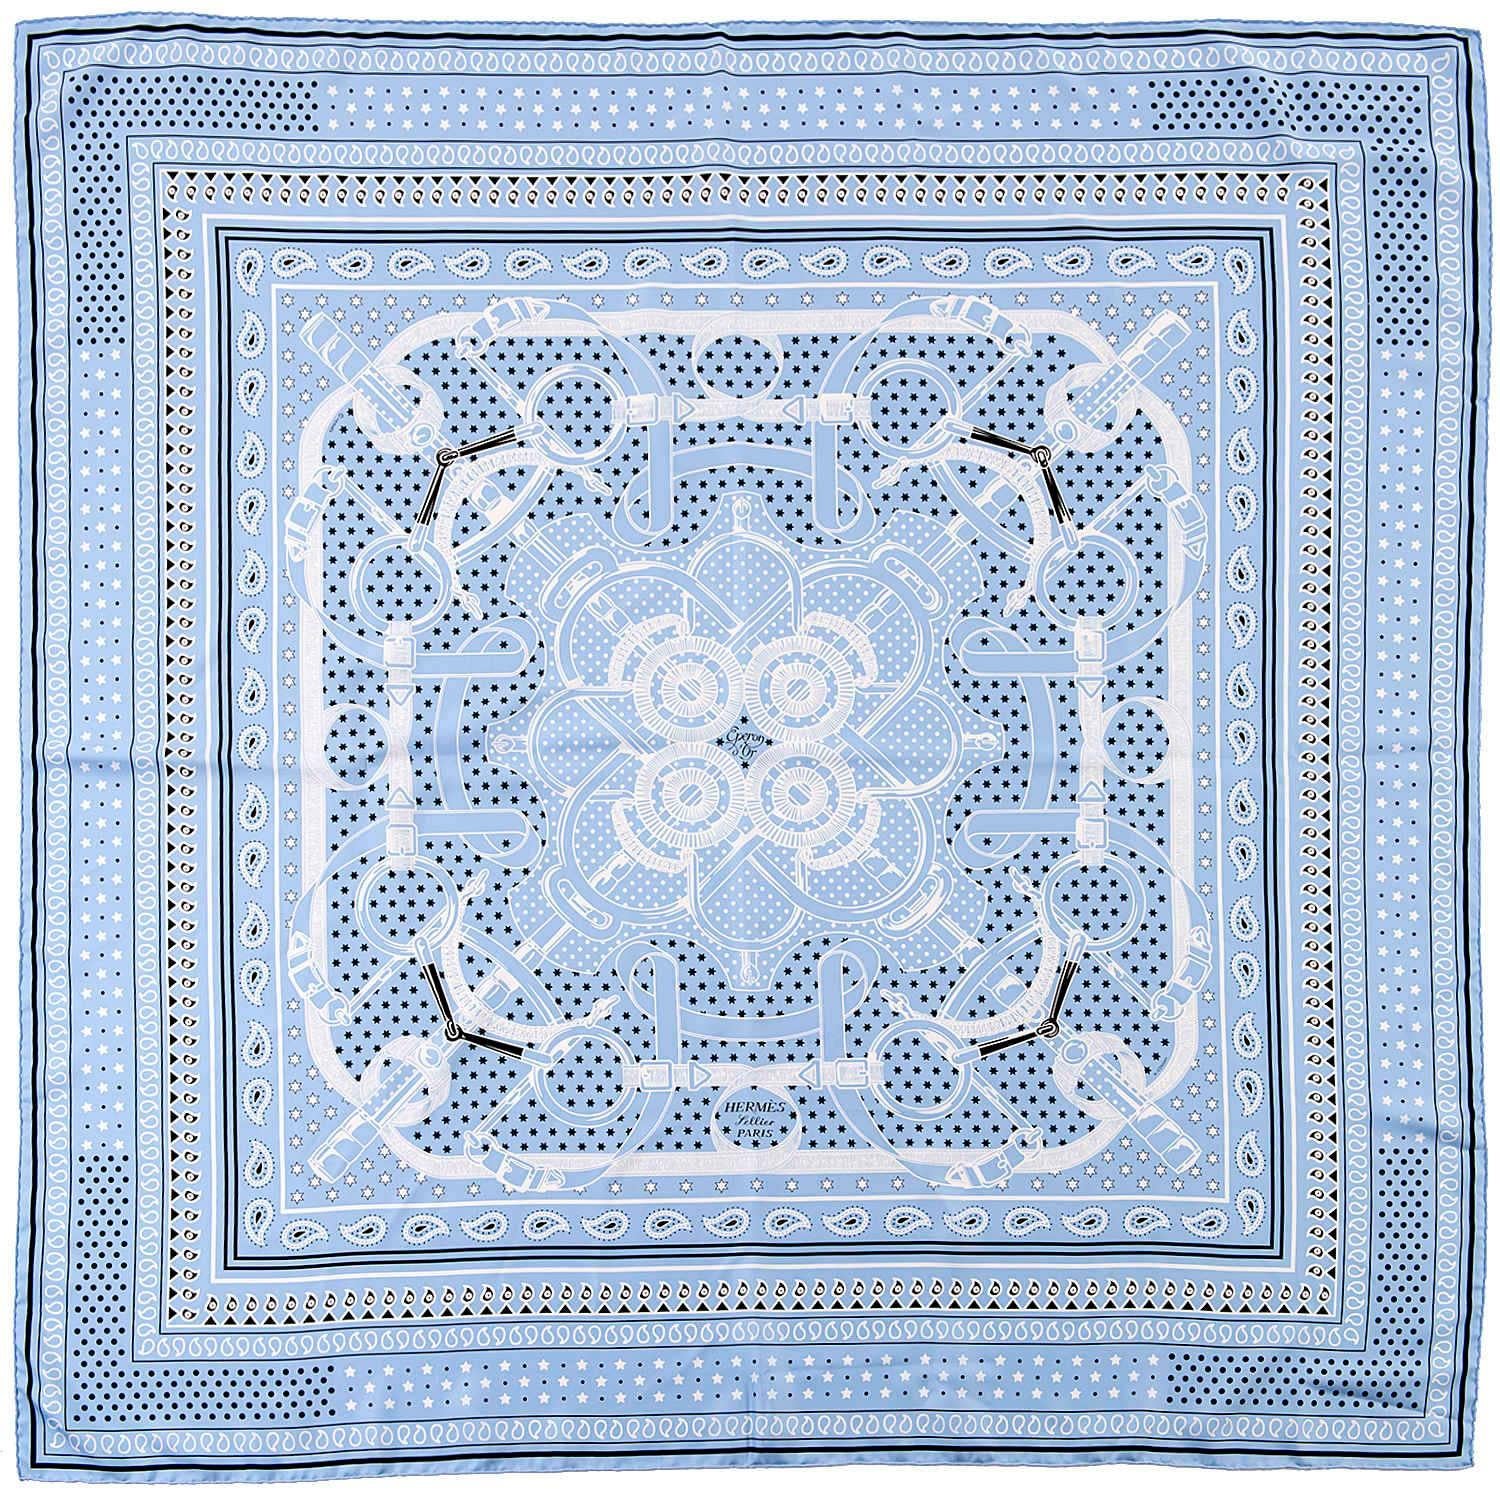 Pure Luxury. This gorgeous Hermes Silk Shawl, 'Eperon d'or Remix' by the legendary Hermes designer Henri d'Origny, was first released in 1974 and is in pristine 'store-fresh' condition. The light blue ground is highlighted with black and white